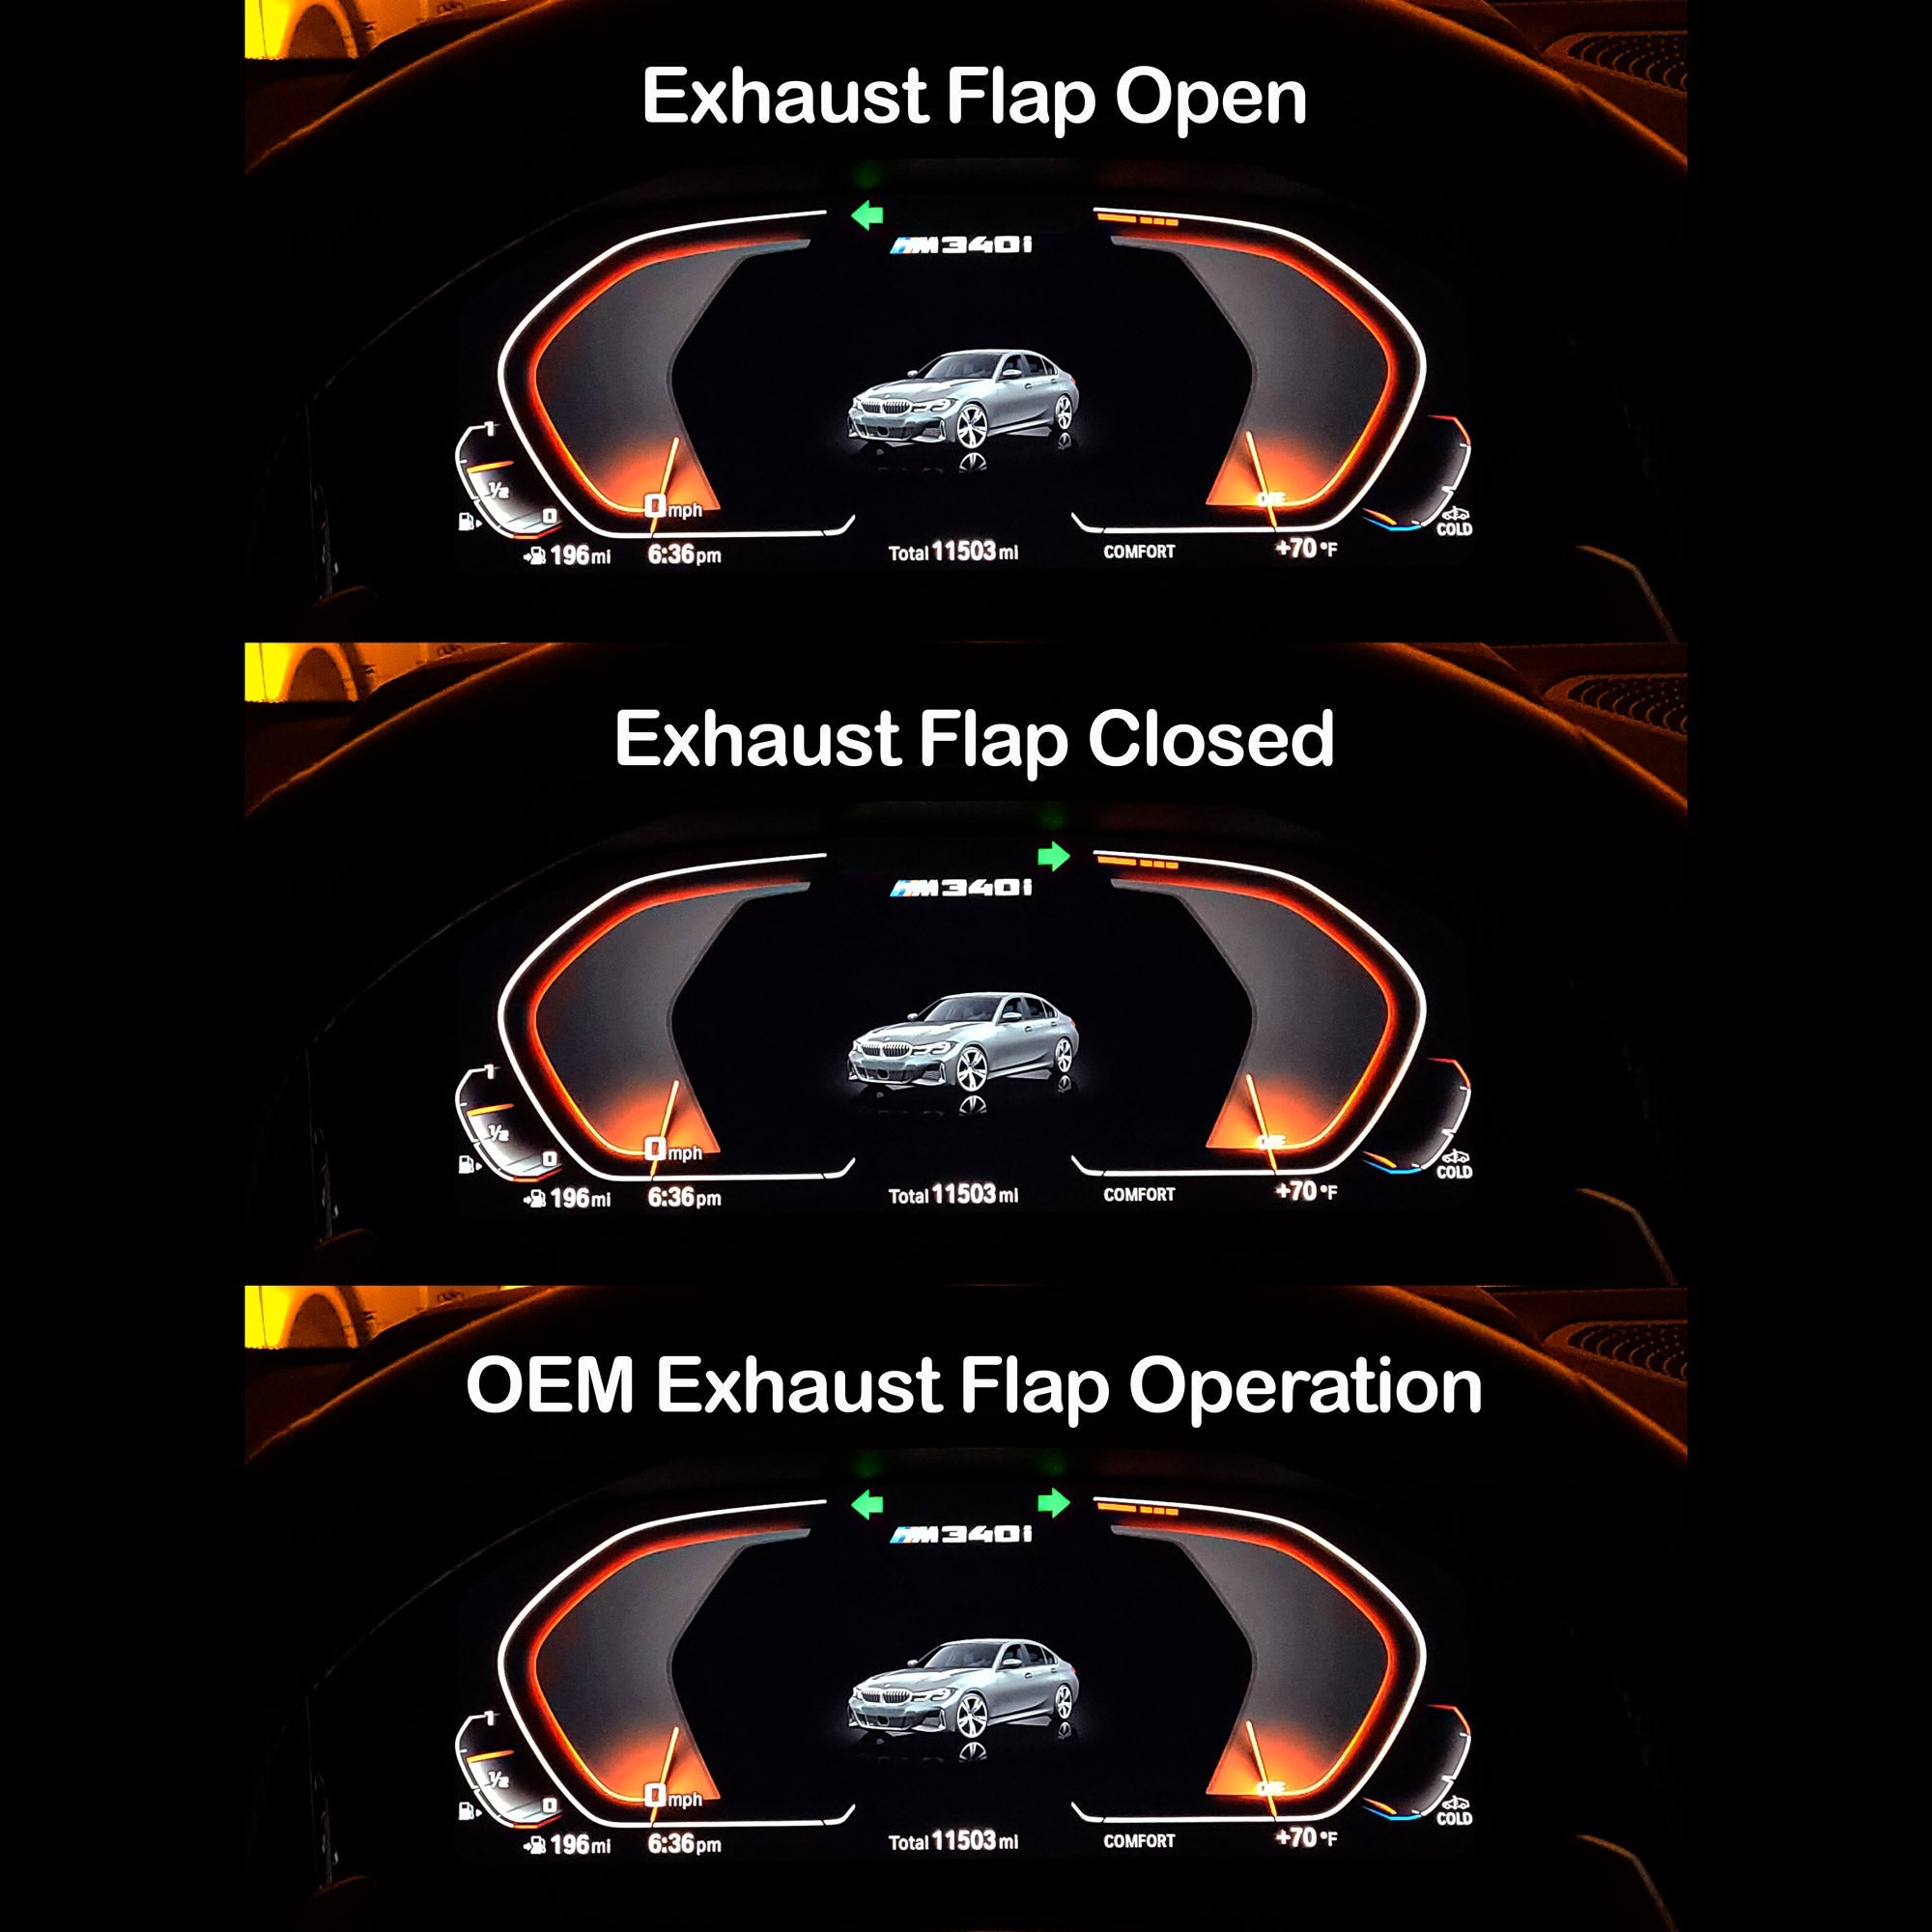 OEM exhaust flap operation infographic